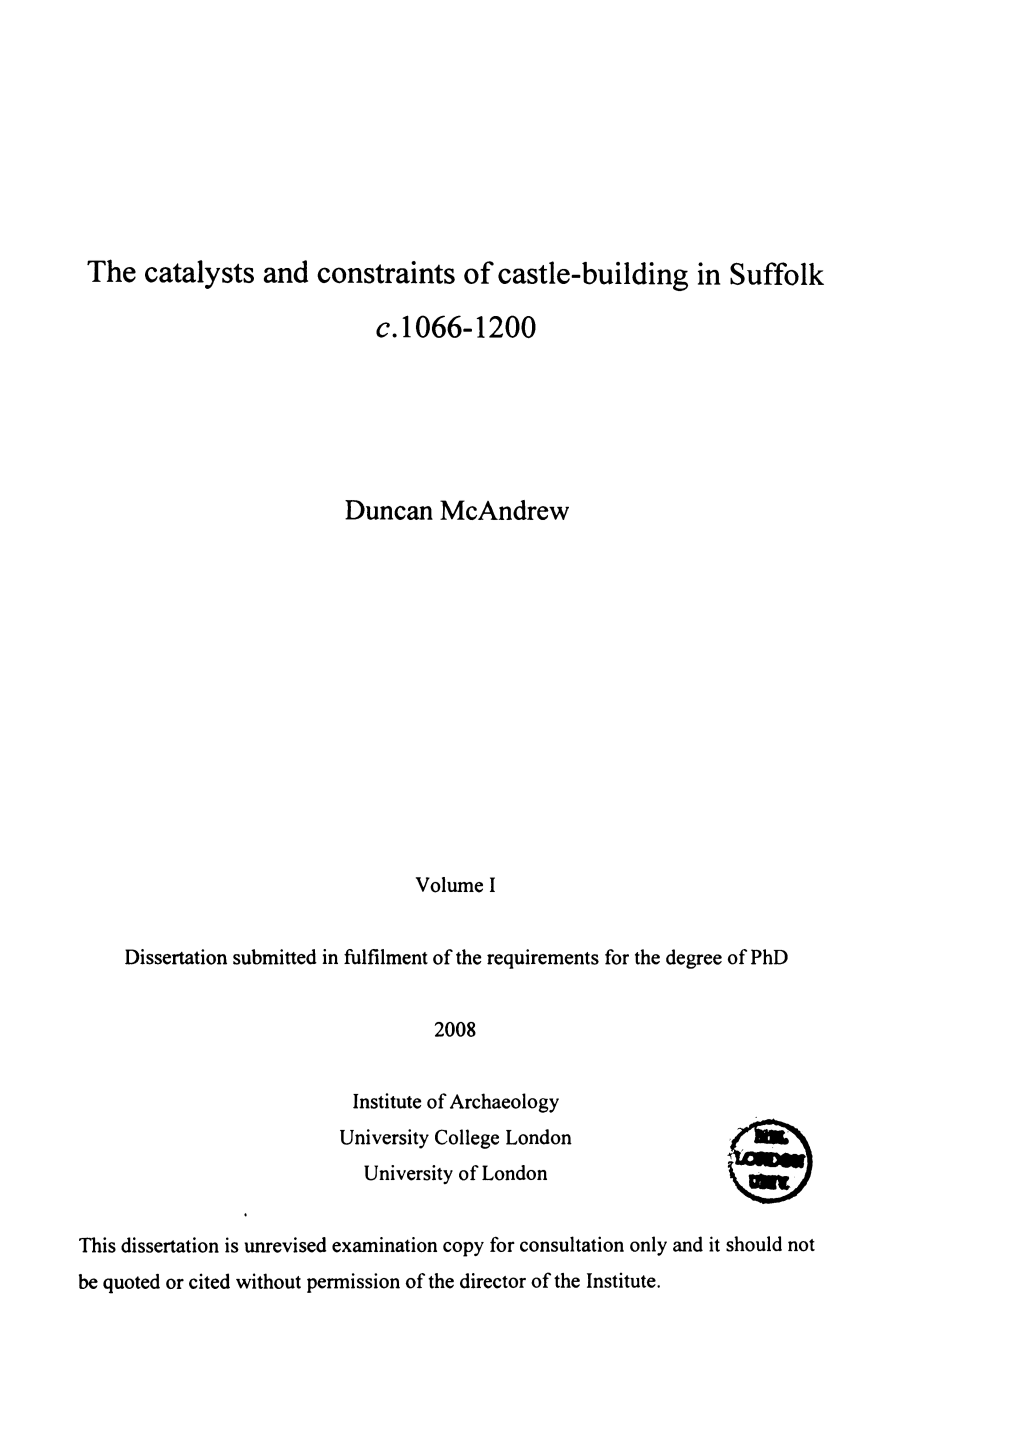 The Catalysts and Constraints of Castle-Building in Suffolk C. 1066-1200